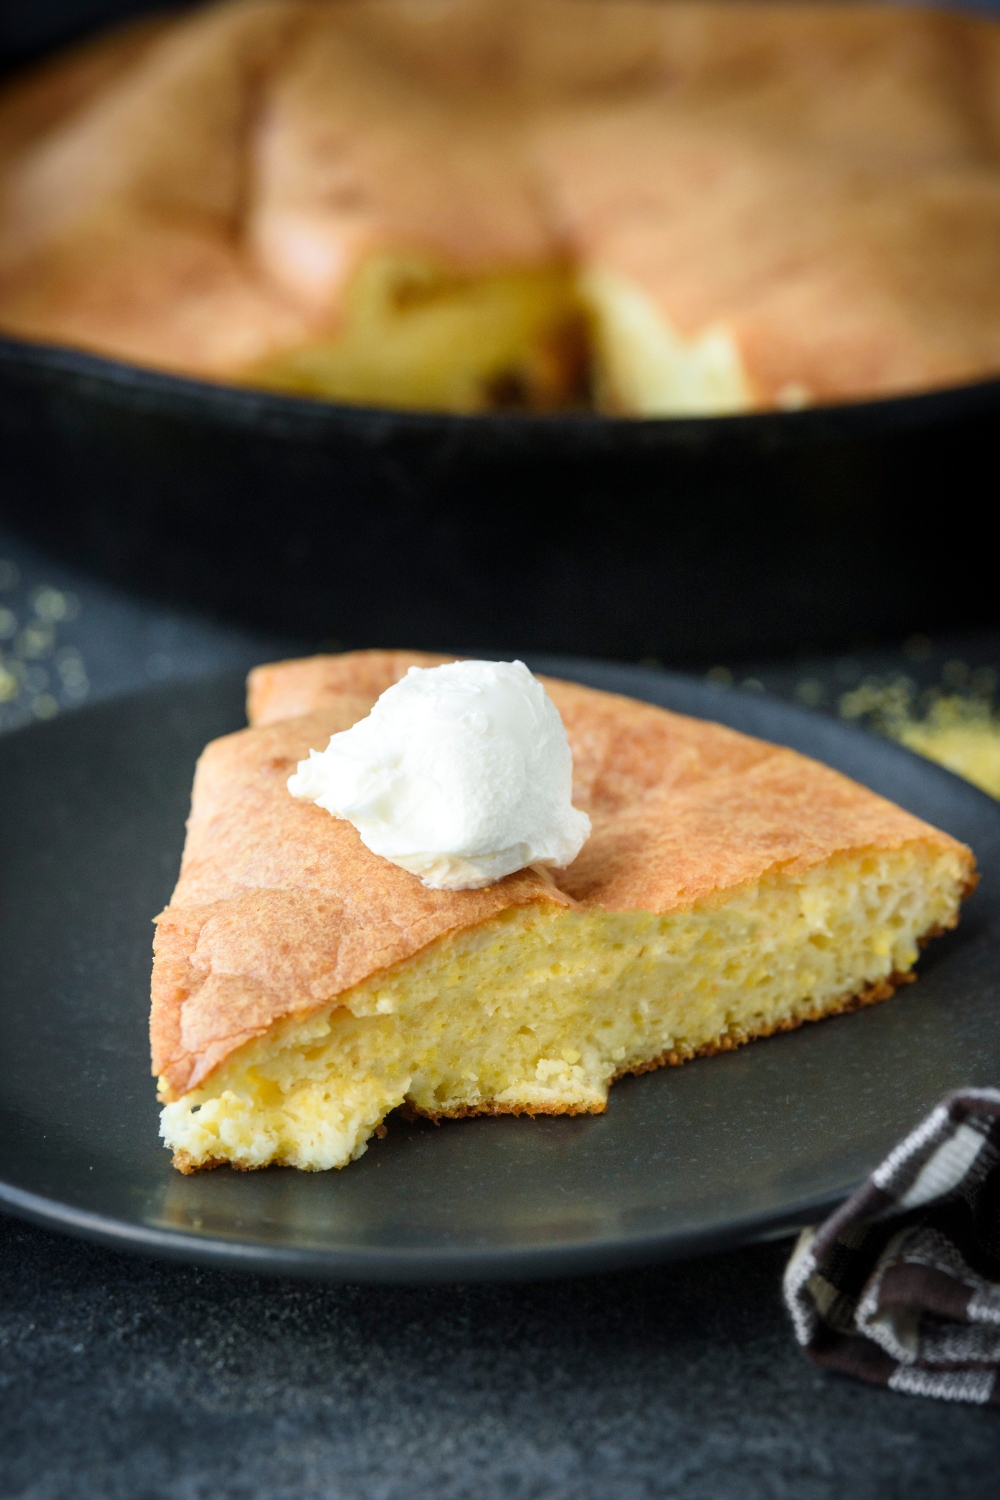 A slice of cornbread topped with cream cheese sits on a black plate.